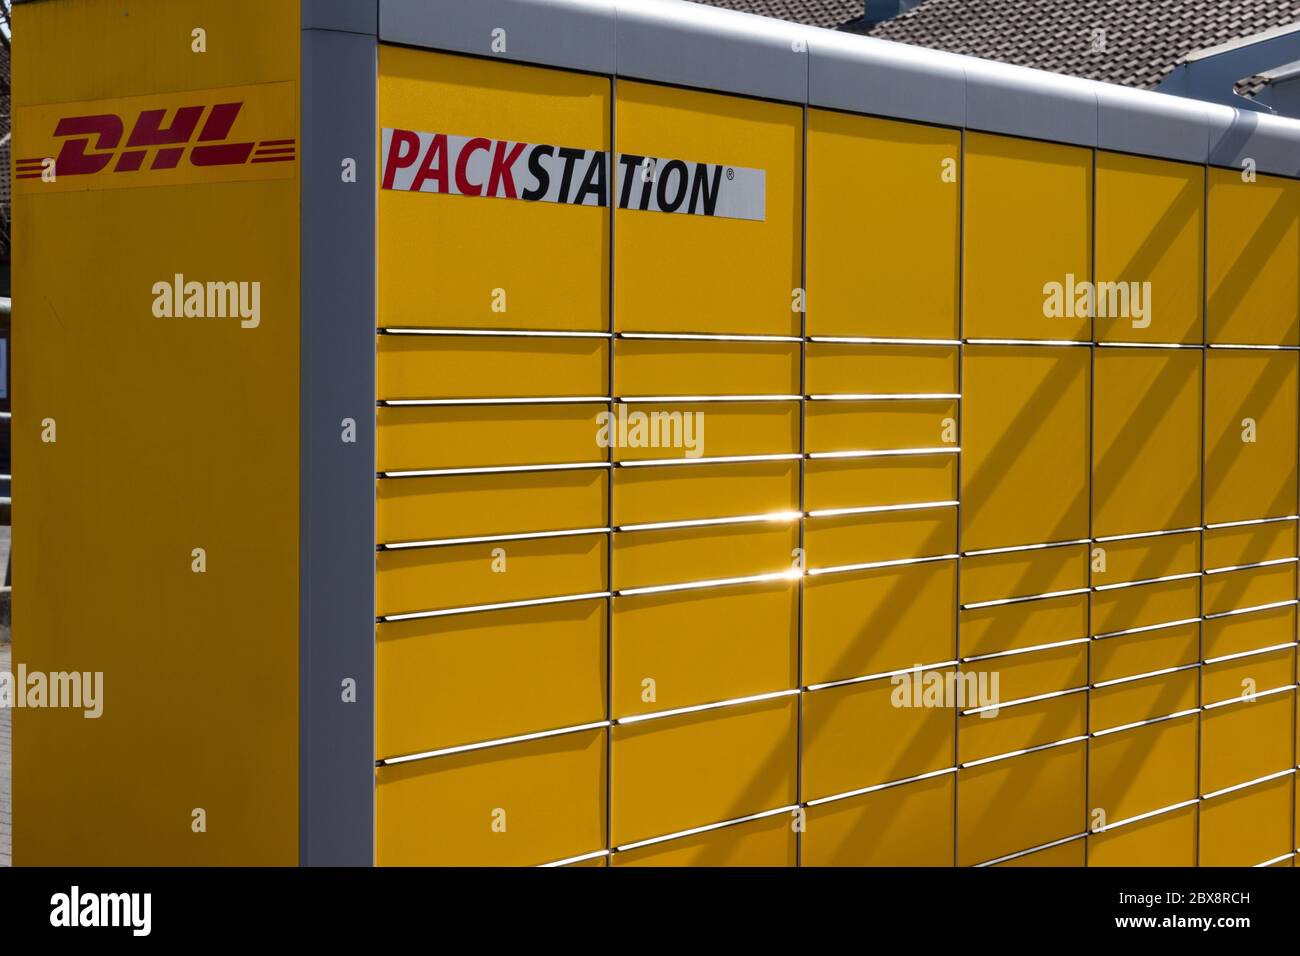 Package Station Of Dhl High Resolution Stock Photography and Images - Alamy